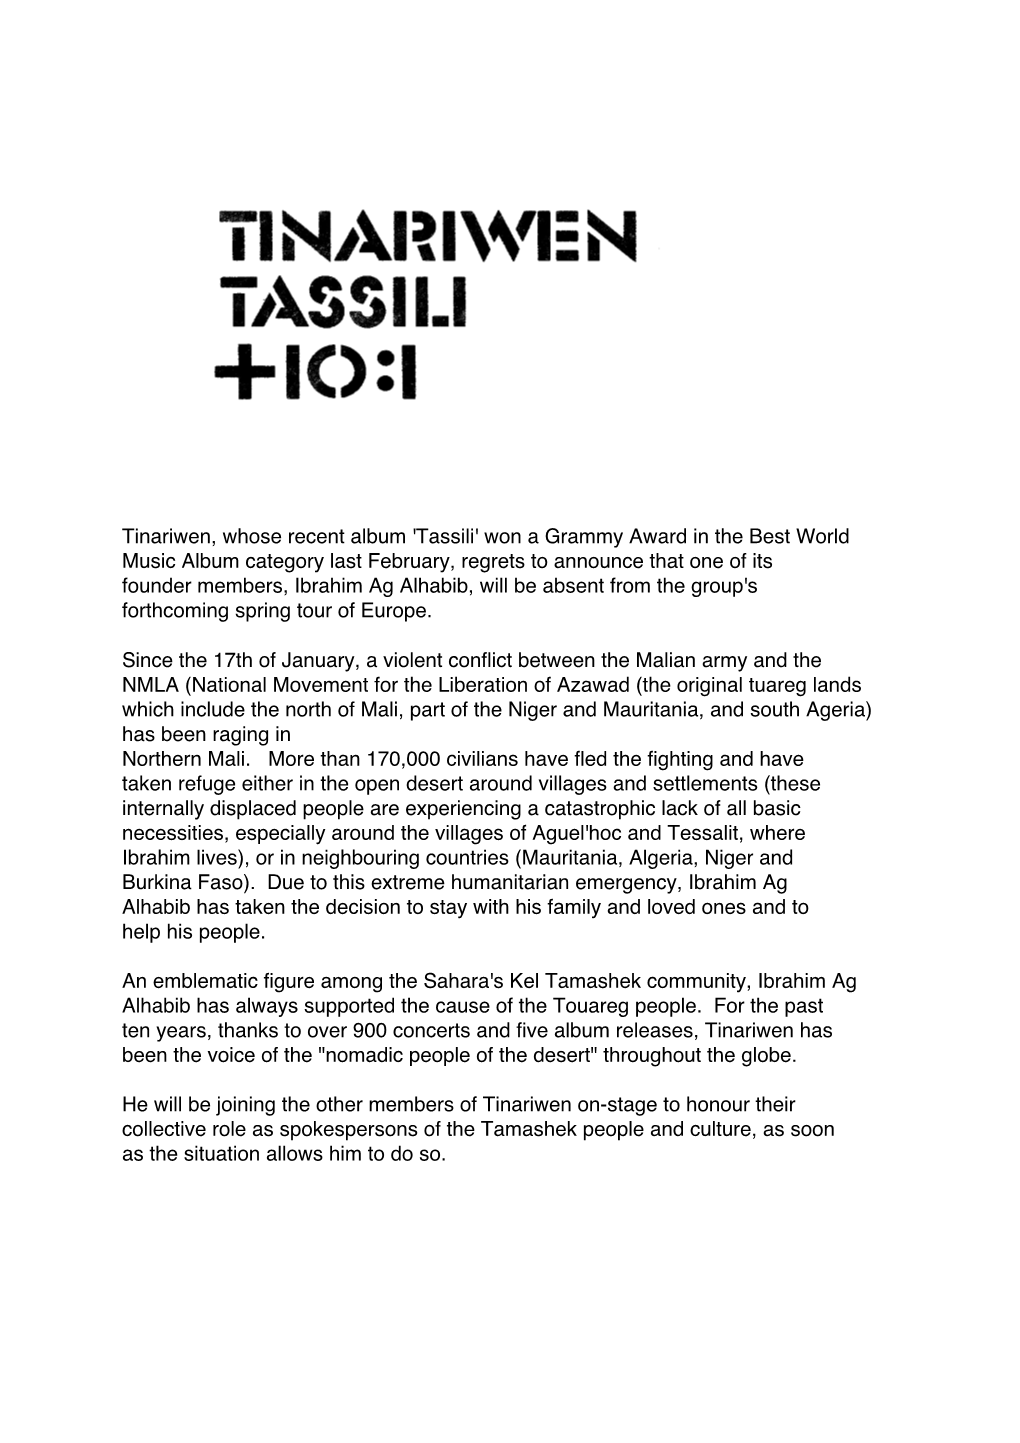 Tinariwen, Whose Recent Album 'Tassili' Won a Grammy Award in the Best World Music Album Category Last February, Regrets to Anno